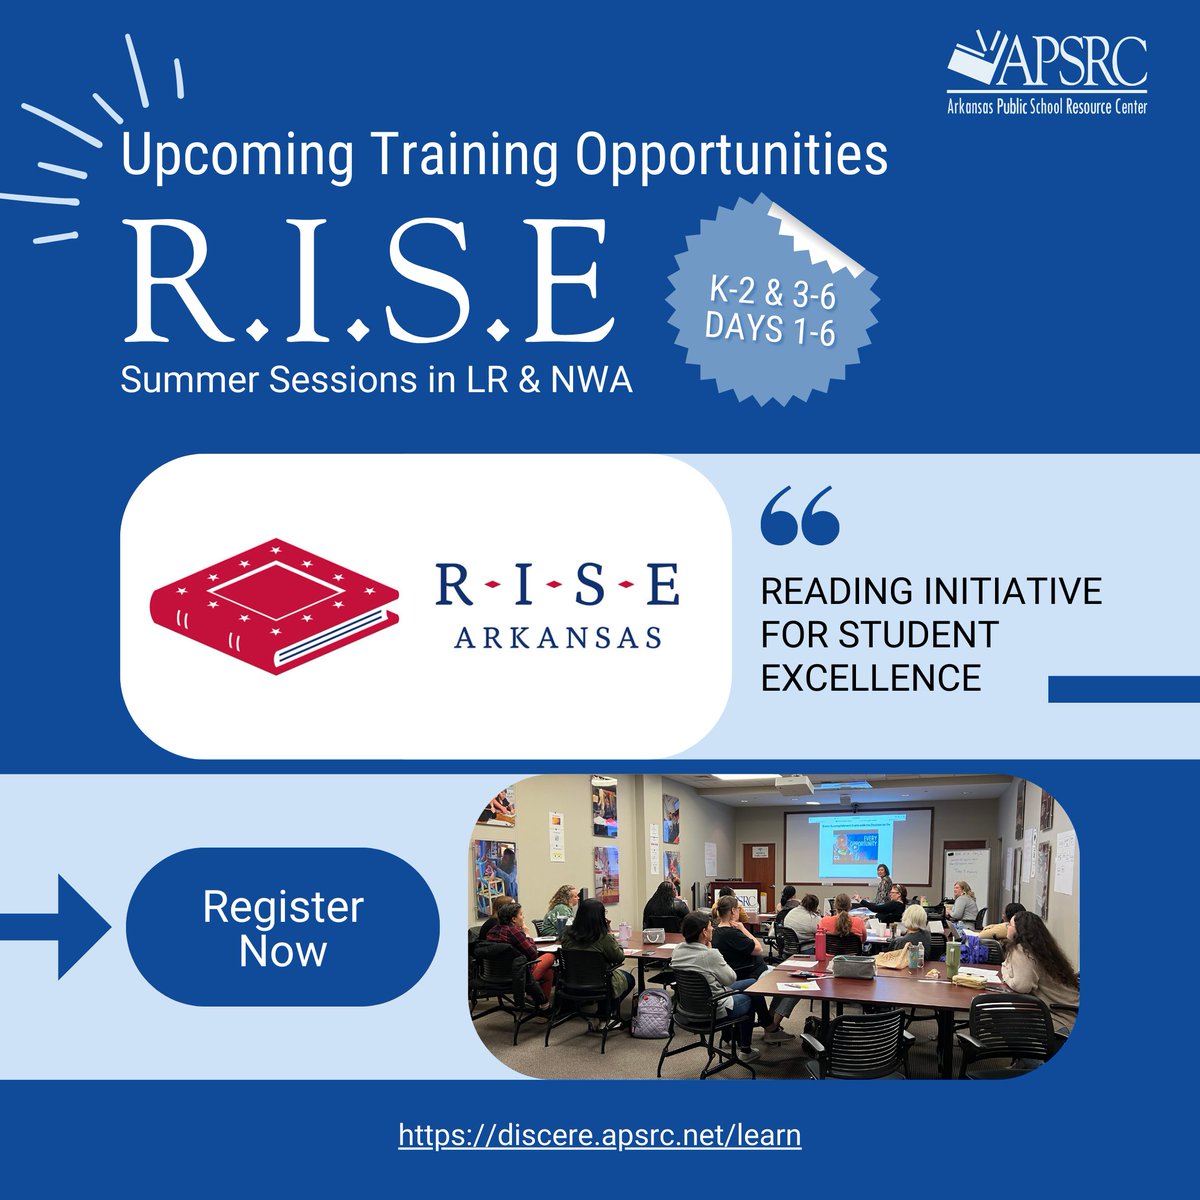 Whether you're attending all 6 days or catching up on missed sessions, APSRC is excited to provide R.I.S.E training at our Little Rock and Springdale locations. Explore your training options at the link below.
🔗 discere.apsrc.net/learn 

#TeachingResources #EmpoweringEducators